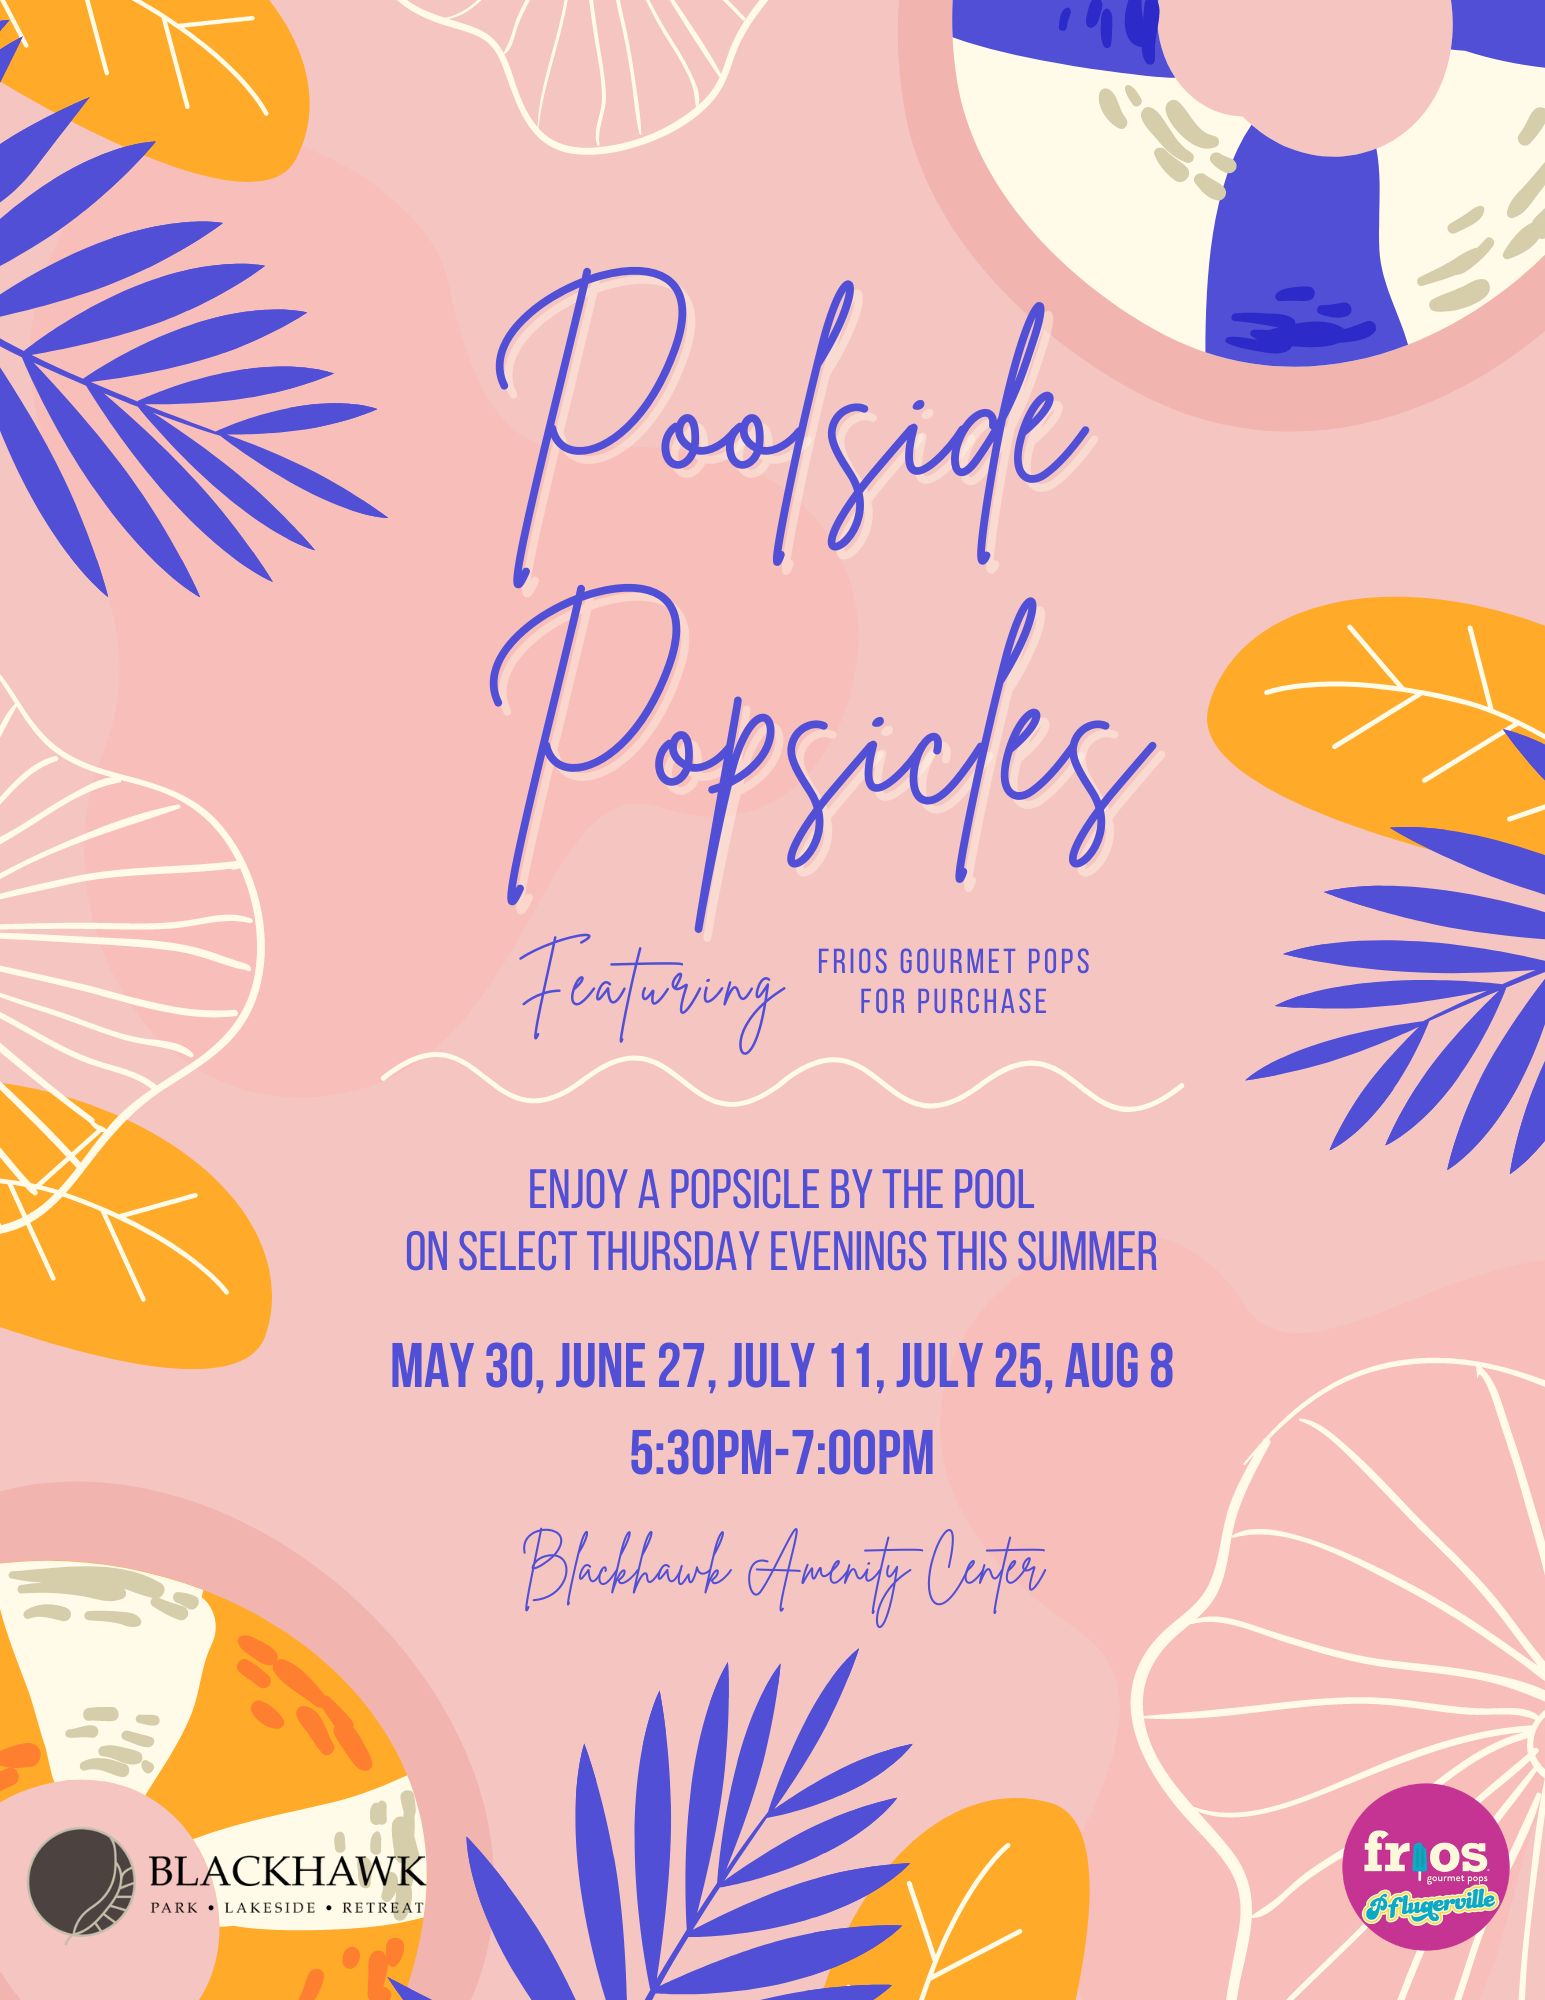 A colorful flyer announcing "Poolside Popsicles" events featuring Frios Gourmet Pops for purchase at Blackhawk Amenity Center. The background is pink with decorative tropical leaves and sliced fruit illustrations. Event details include dates: May 30, June 27, July 11, July 25, and August 8, from 5:30 PM to 7:00 PM.